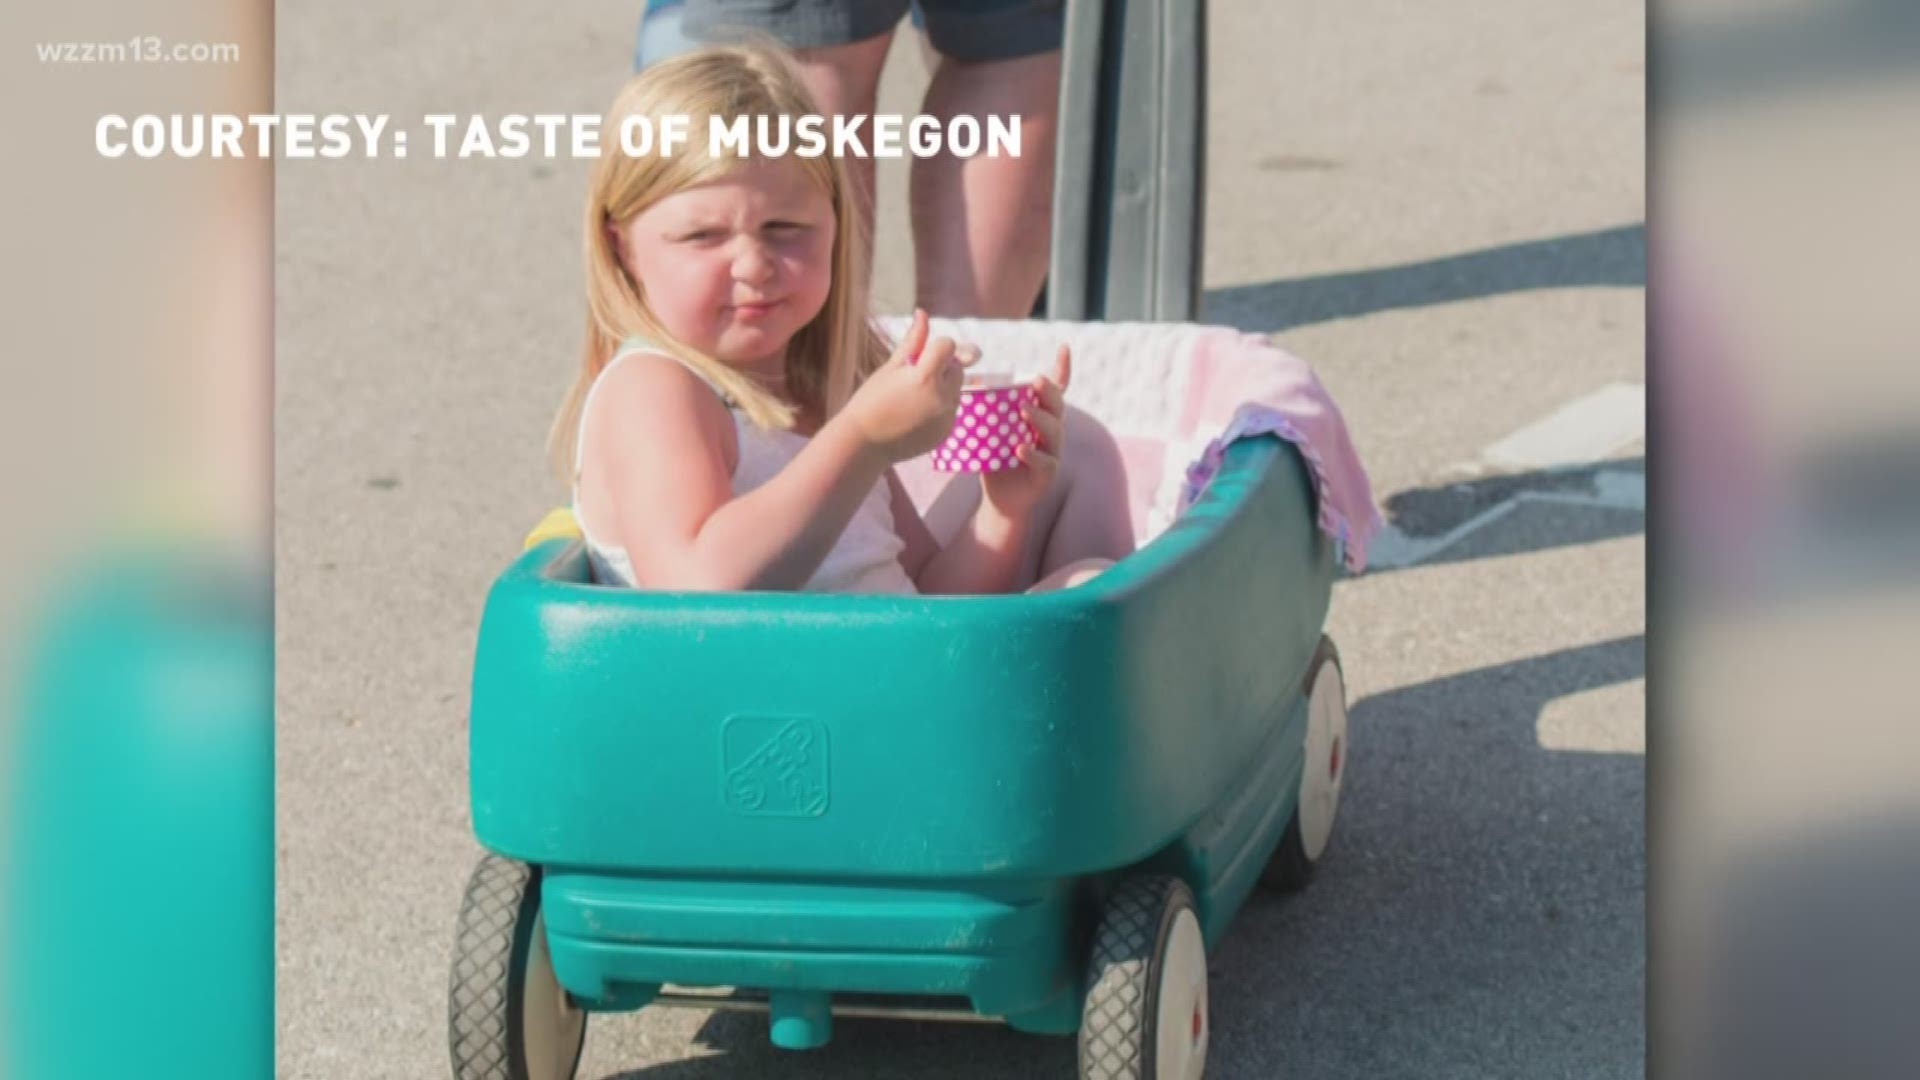 There's is a ton of fun to be had in Muskegon -- from a women's cruise, Parties in the Park, Taste of Muskegon and even Mercy Health Seaway Run. There's something for everyone and Kirk takes a look at what's going on.